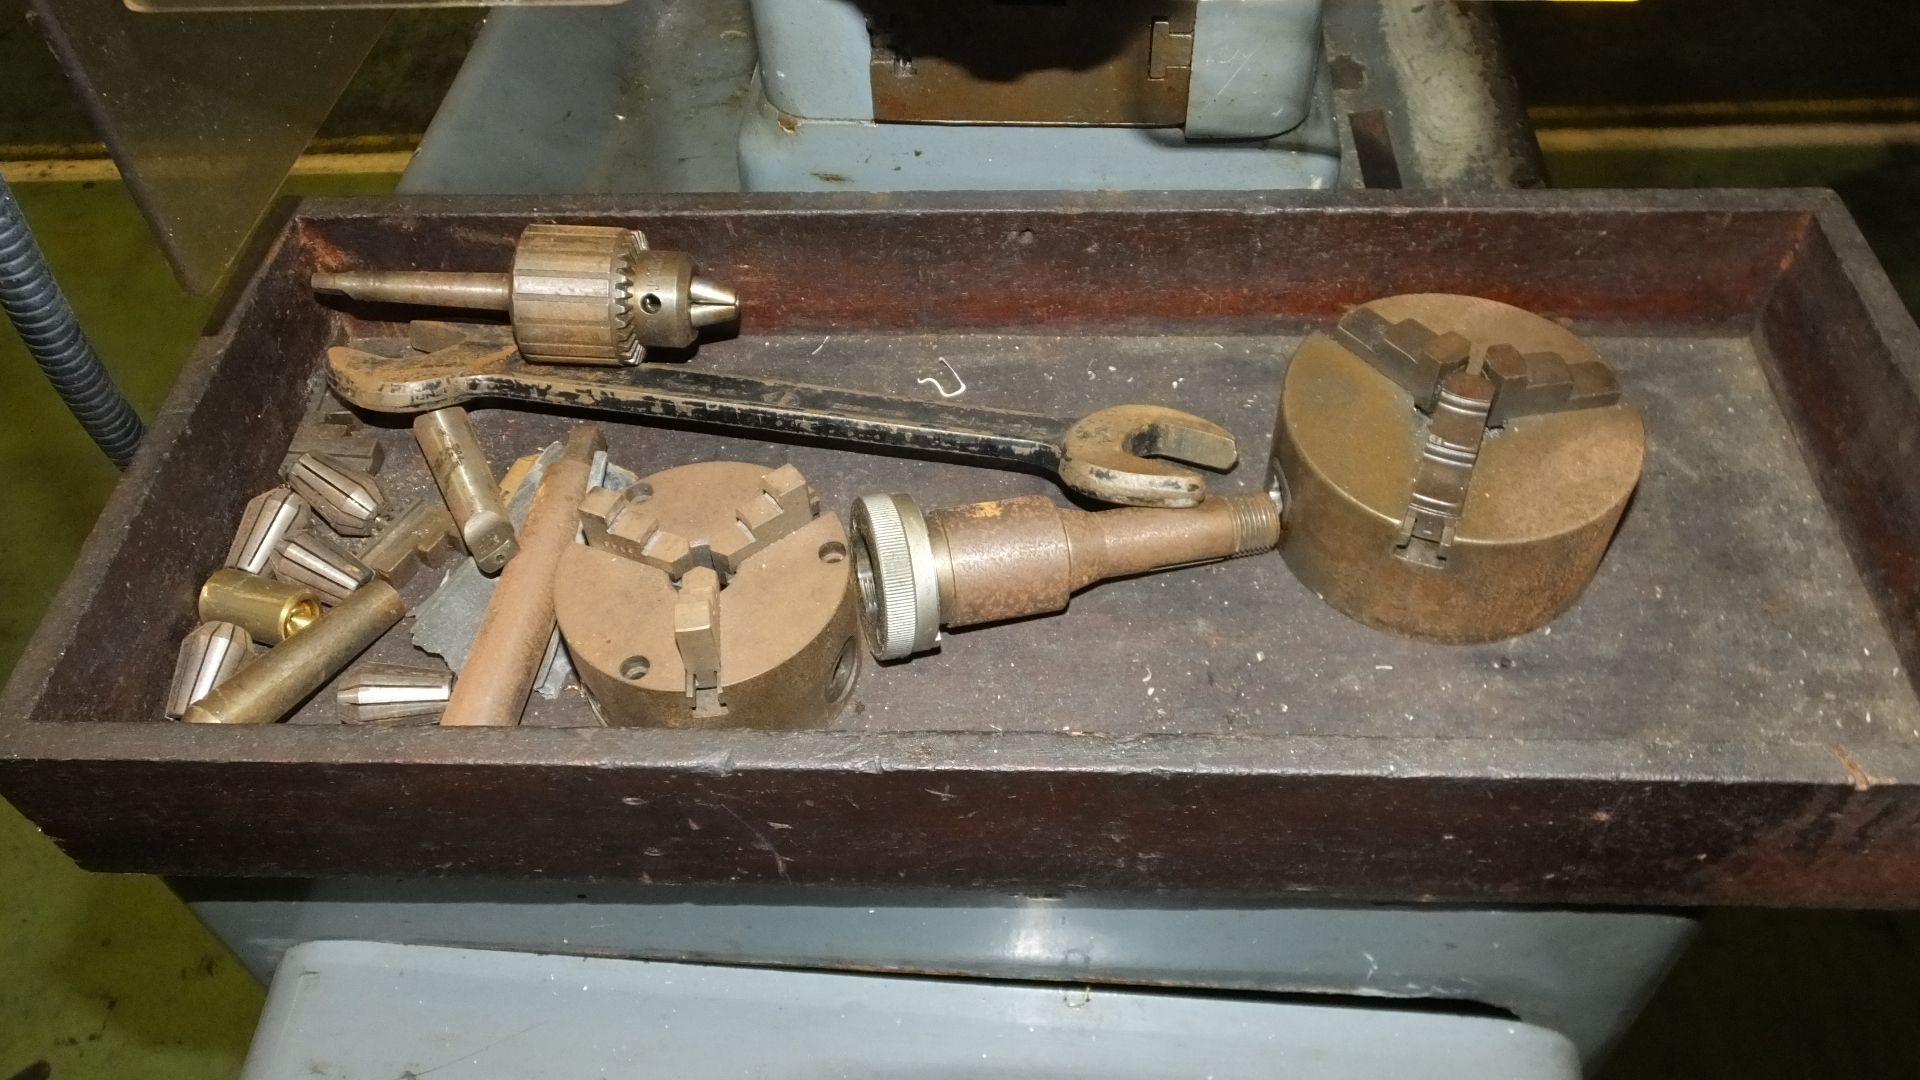 Schaublin S.A. Lathe Type 102-80 - 420V - Serial 250358 - £10 Loading Charge Applied to th - Image 14 of 15